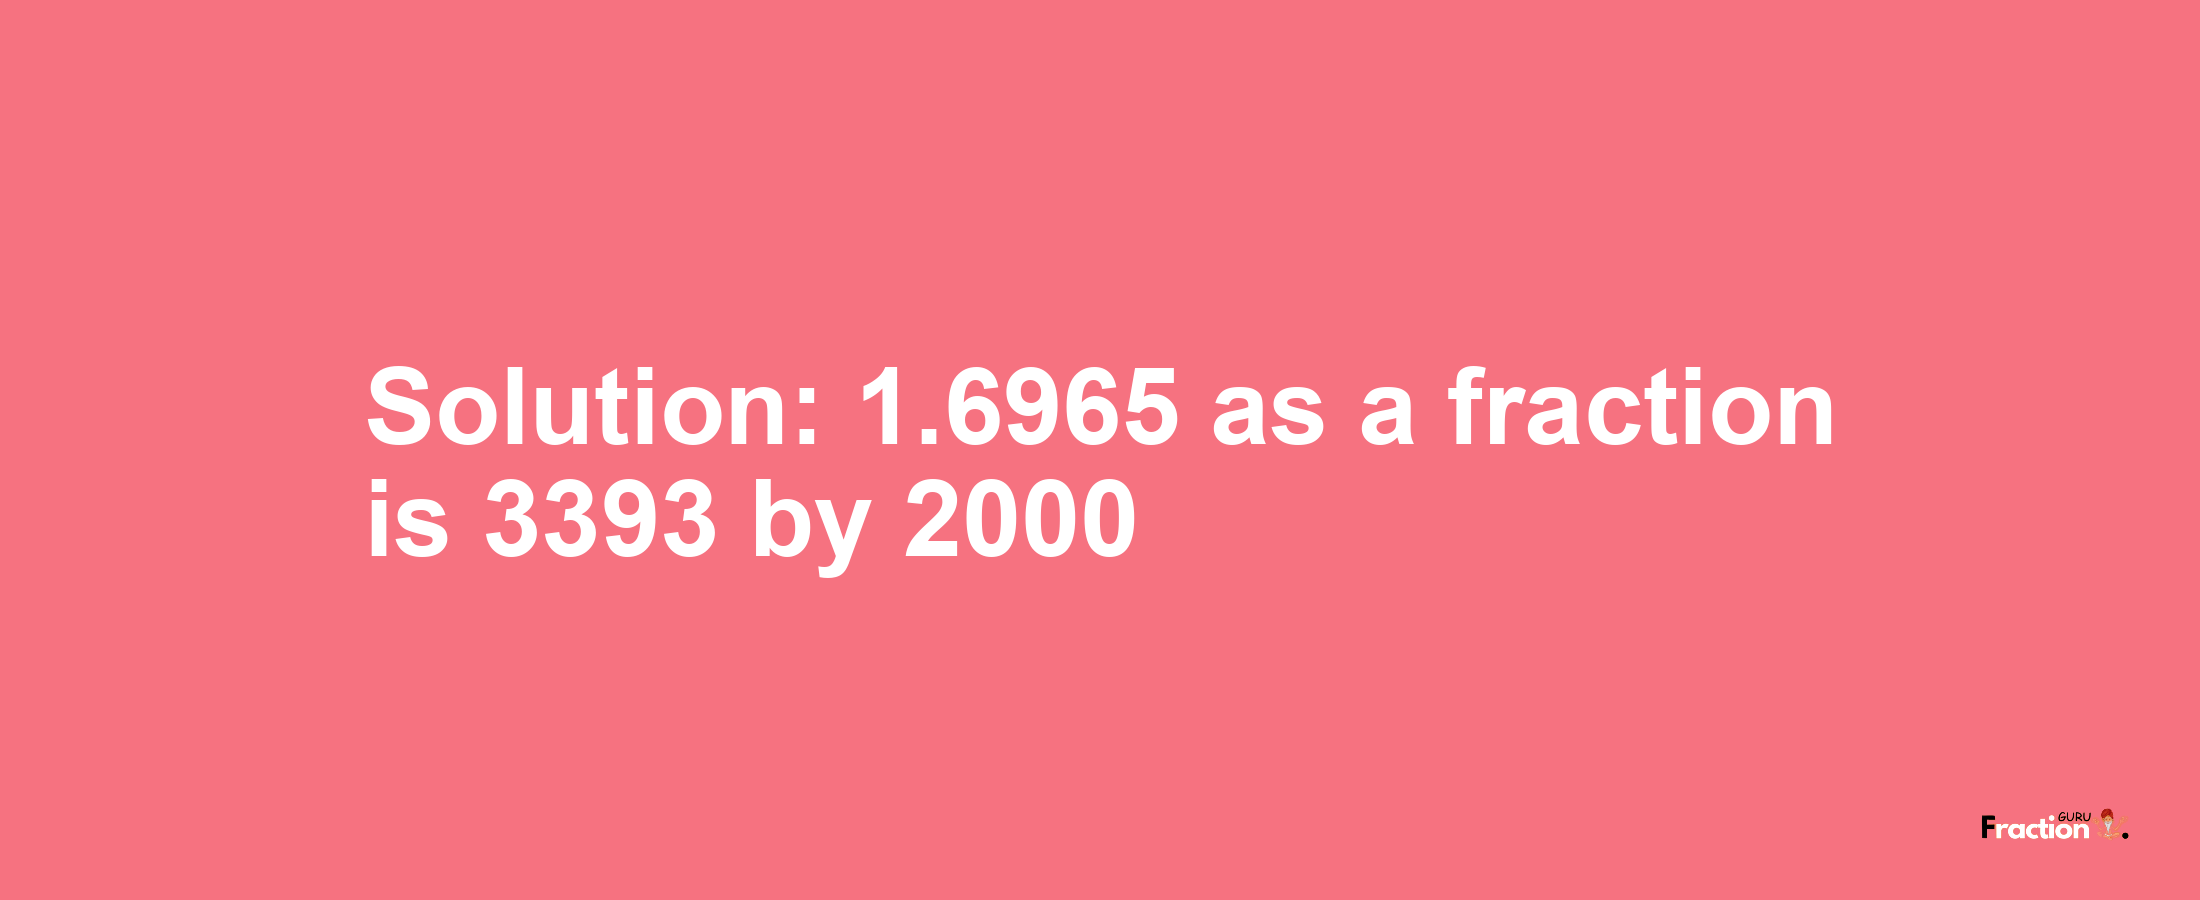 Solution:1.6965 as a fraction is 3393/2000